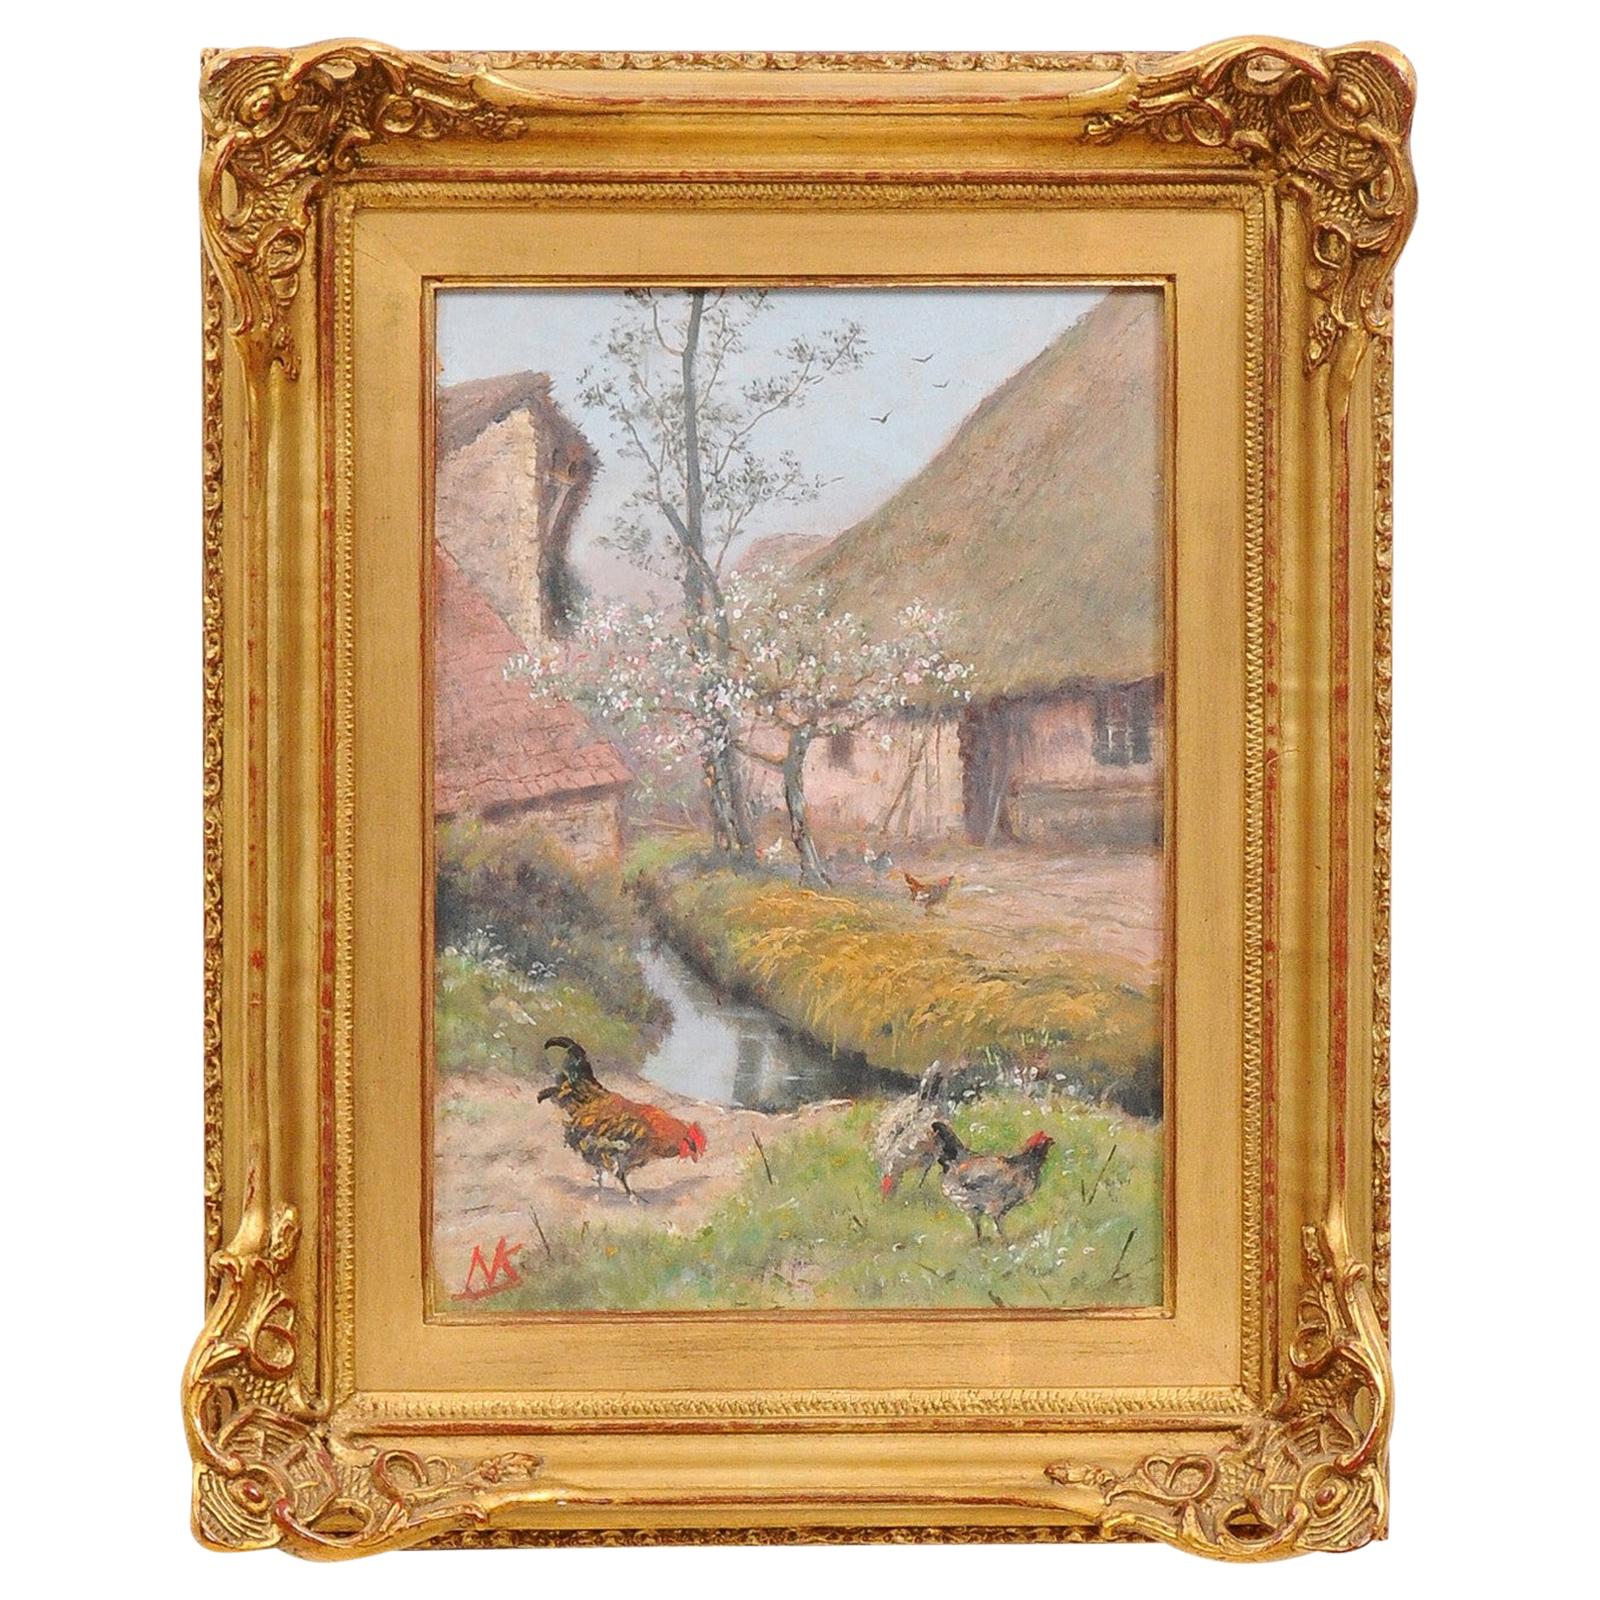 French Alfred de Knyff Early 19th Century Farm Painting with Roosters and Hens